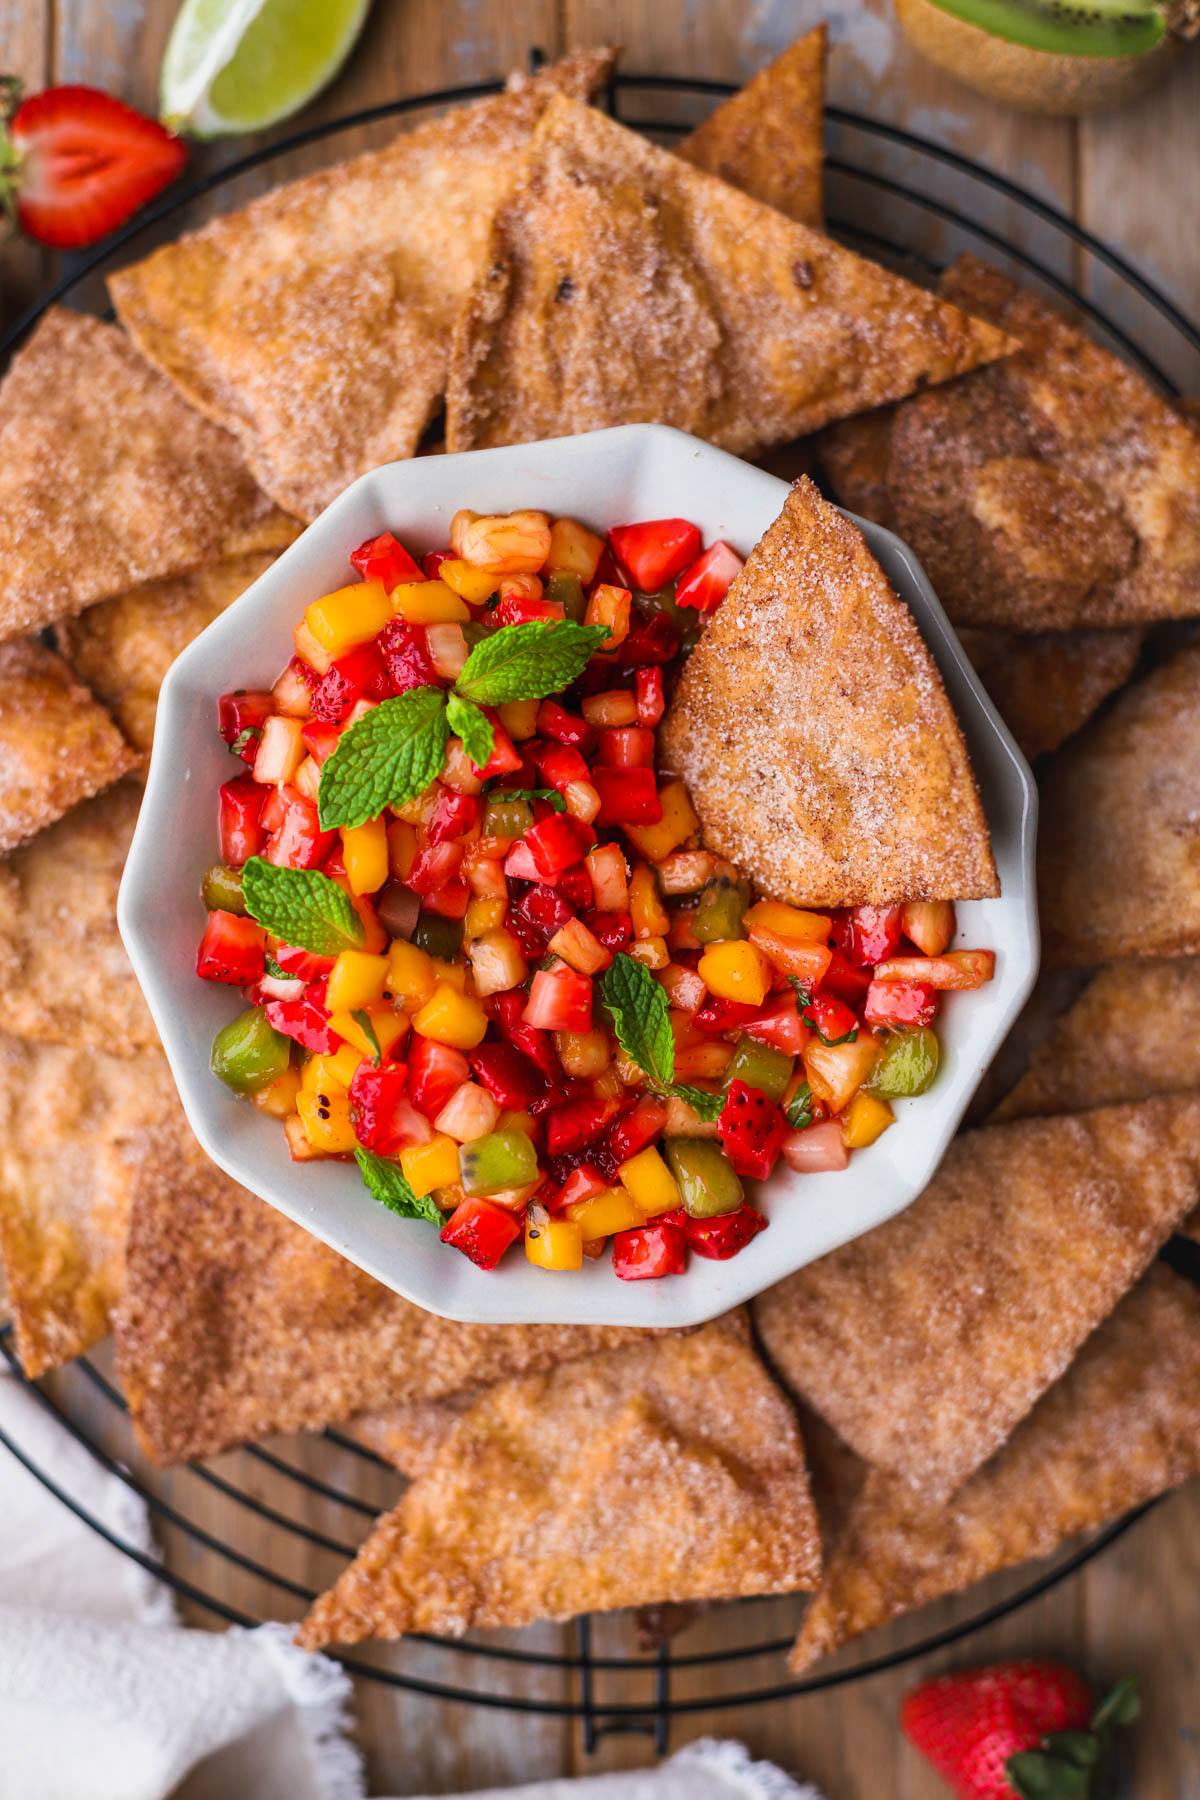 Churro chips served with fresh fruit salsa.  